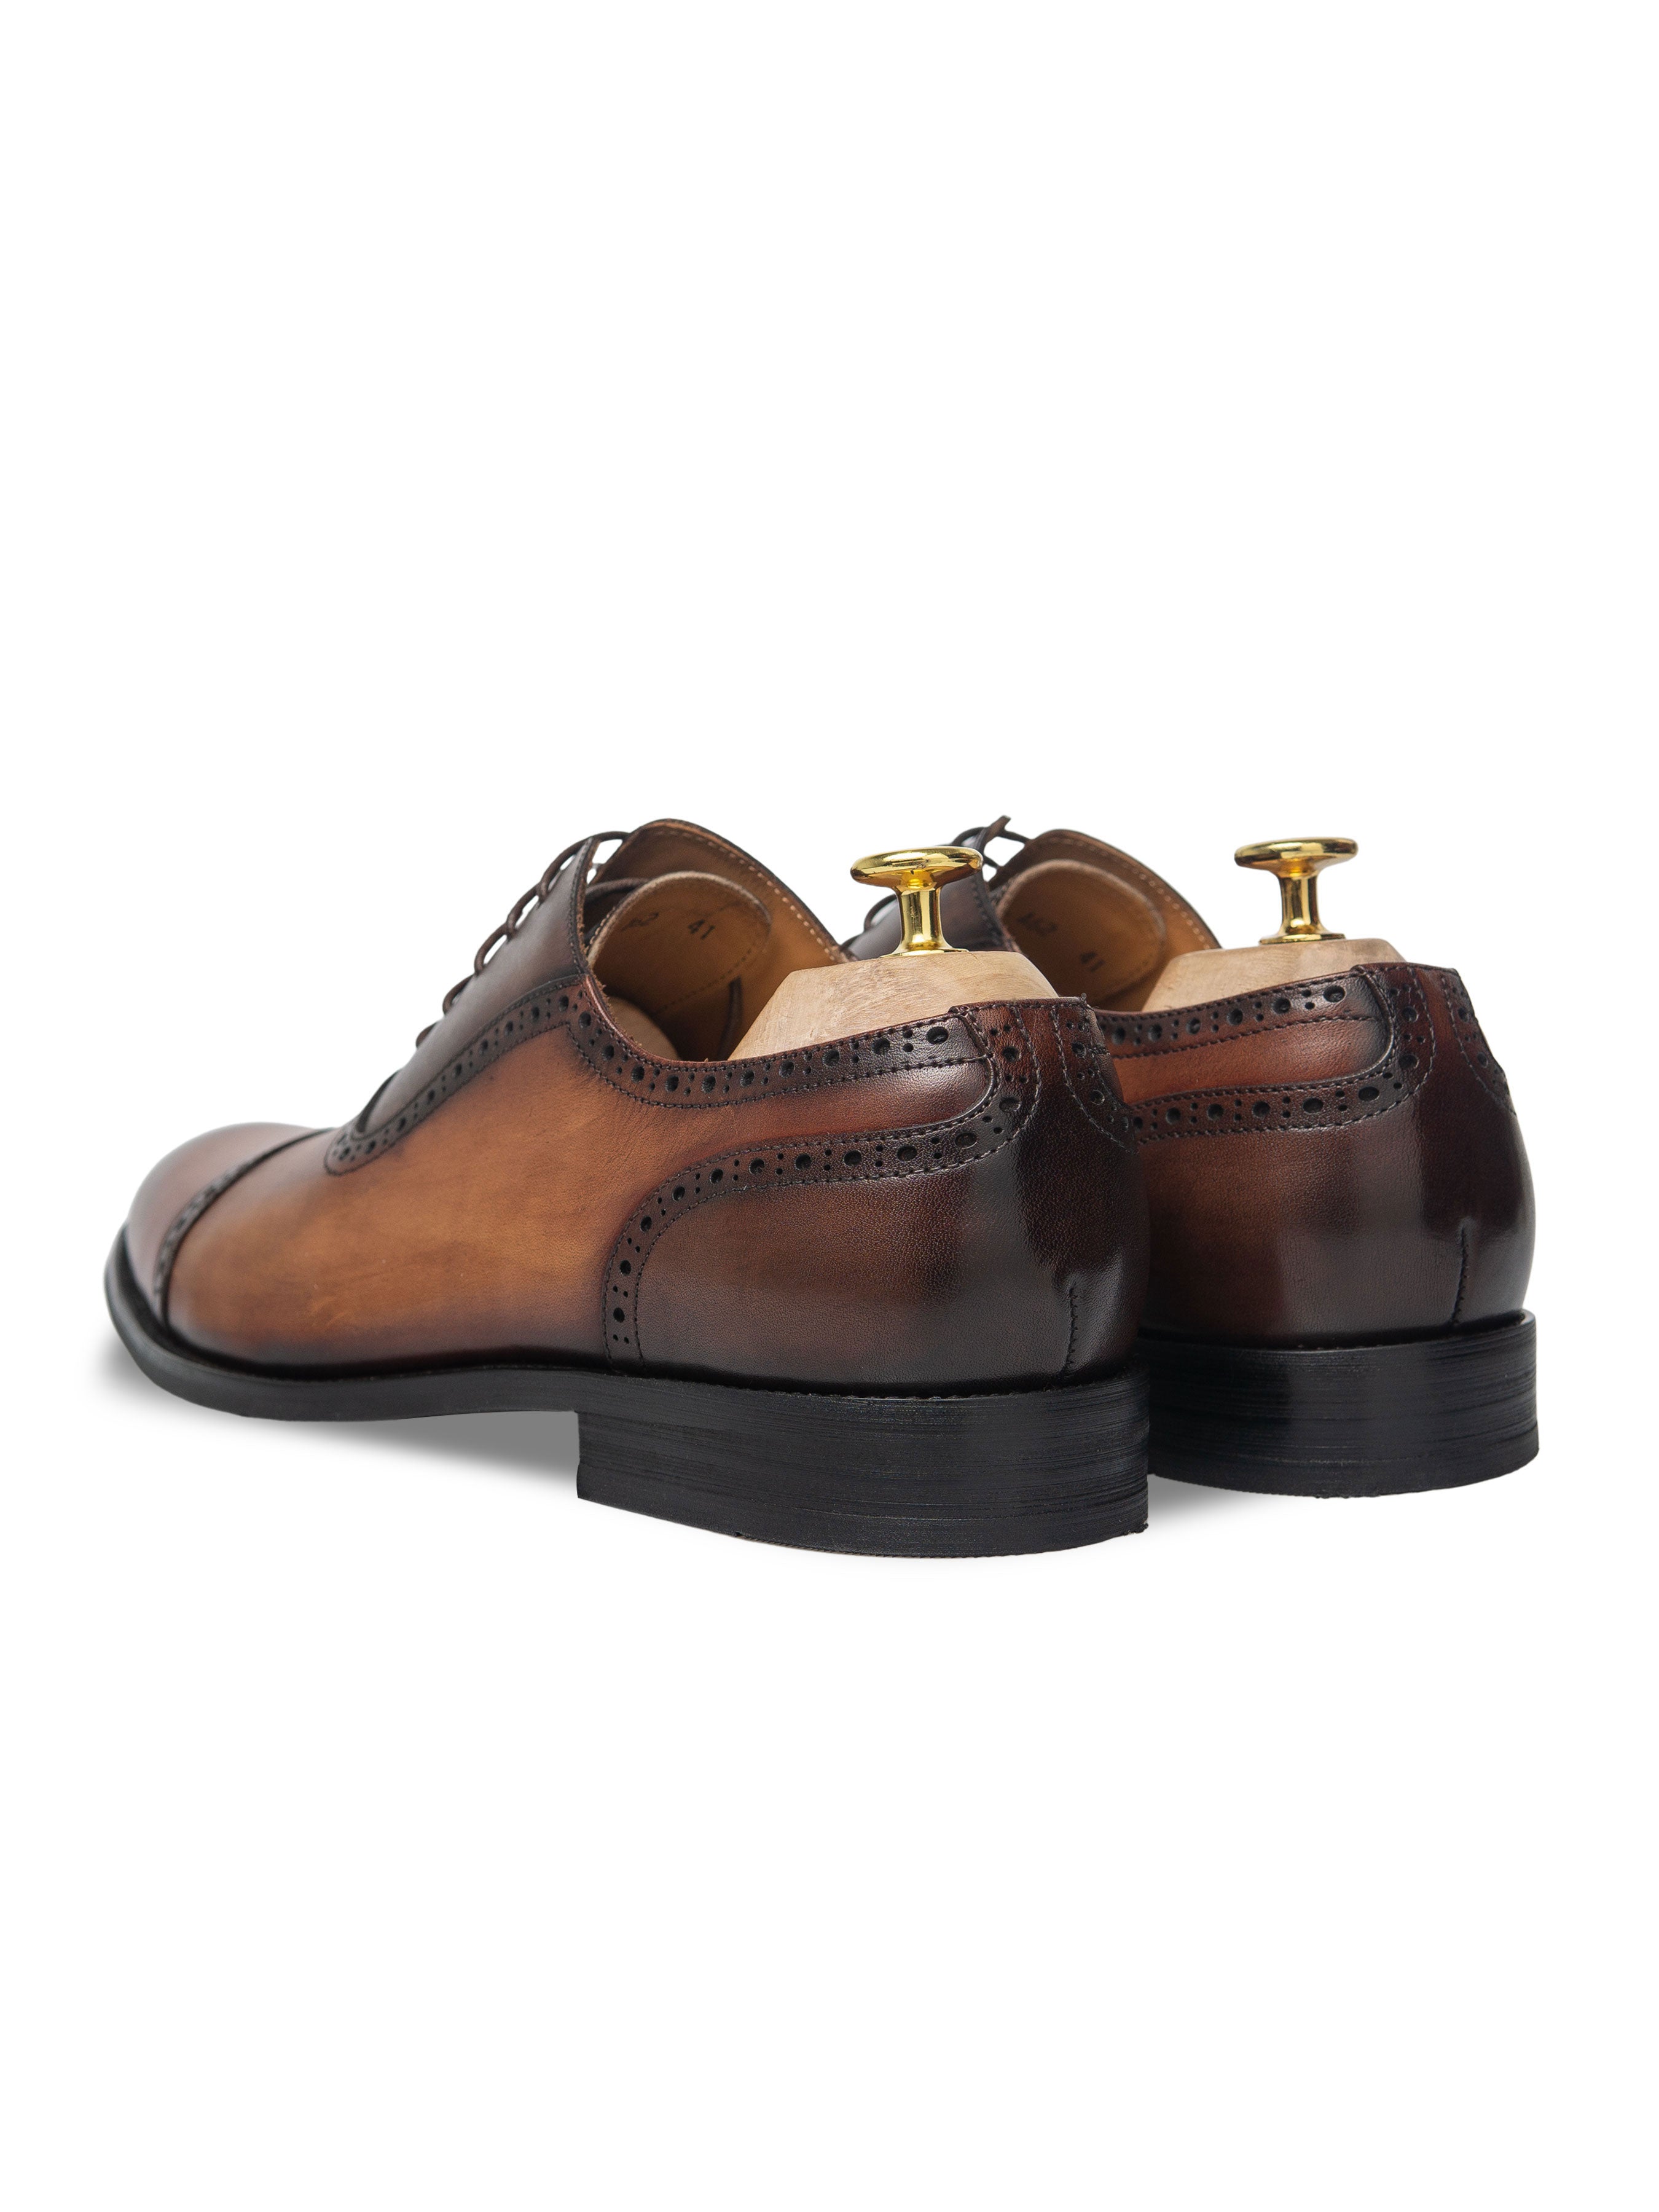 Oxford Cap Toe Adelaide - Duo-Tone Cognac Tan Lace Up (Hand Painted Patina) - Zeve Shoes